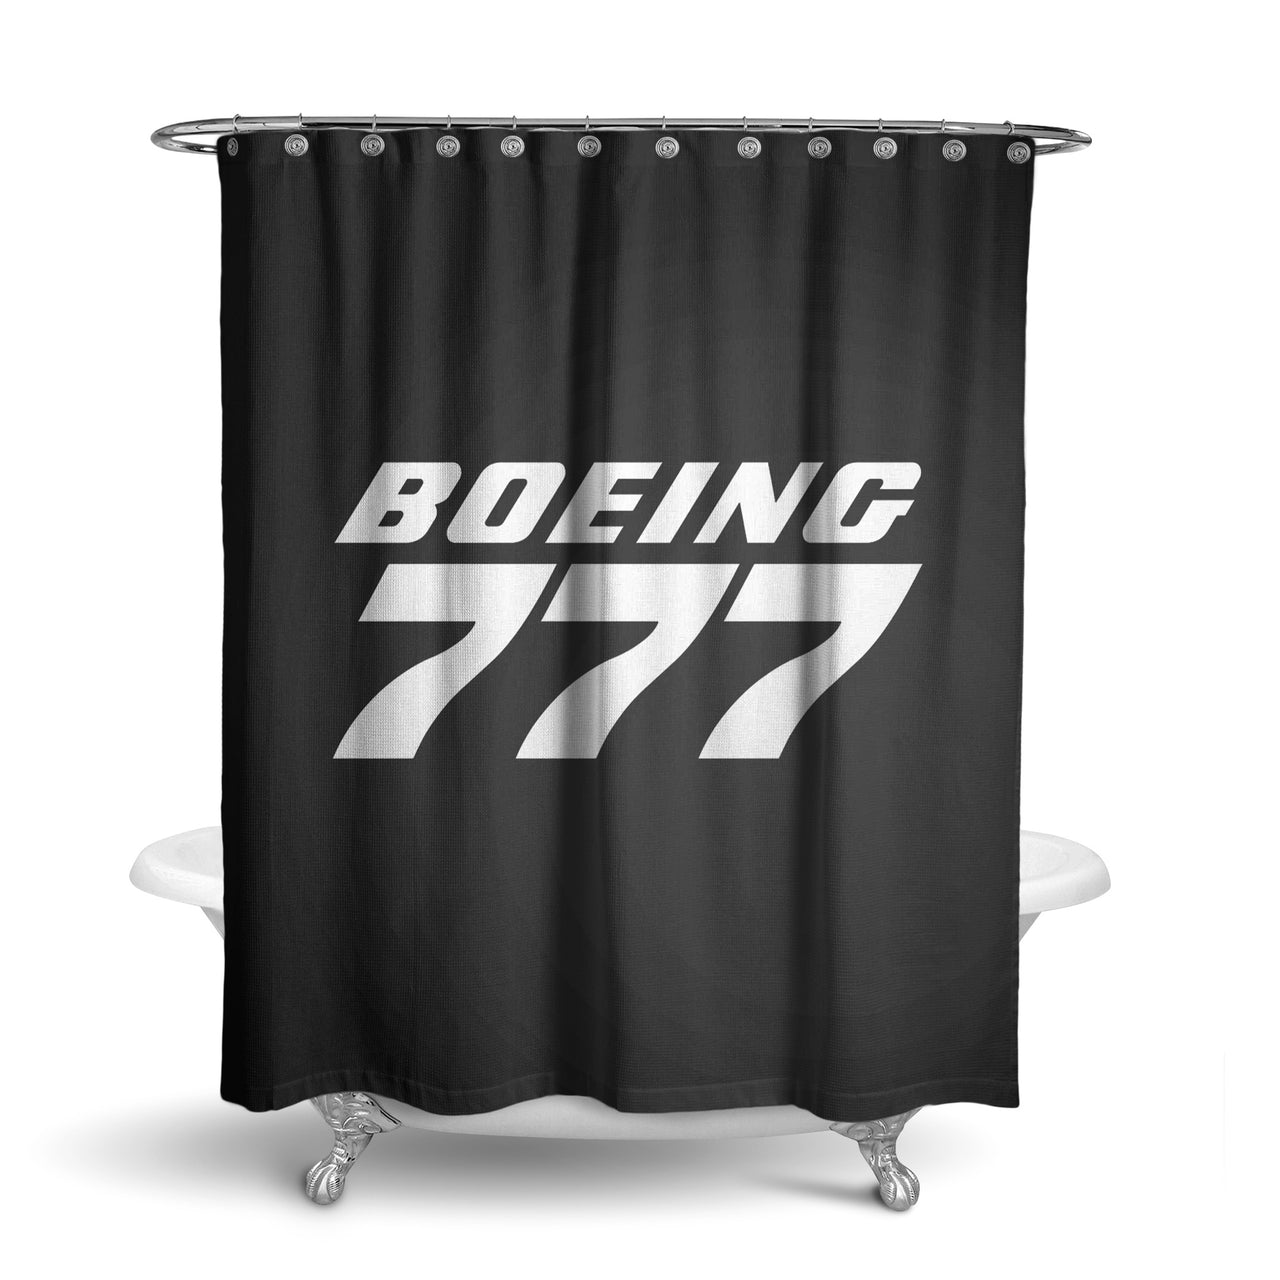 Boeing 777 & Text Designed Shower Curtains